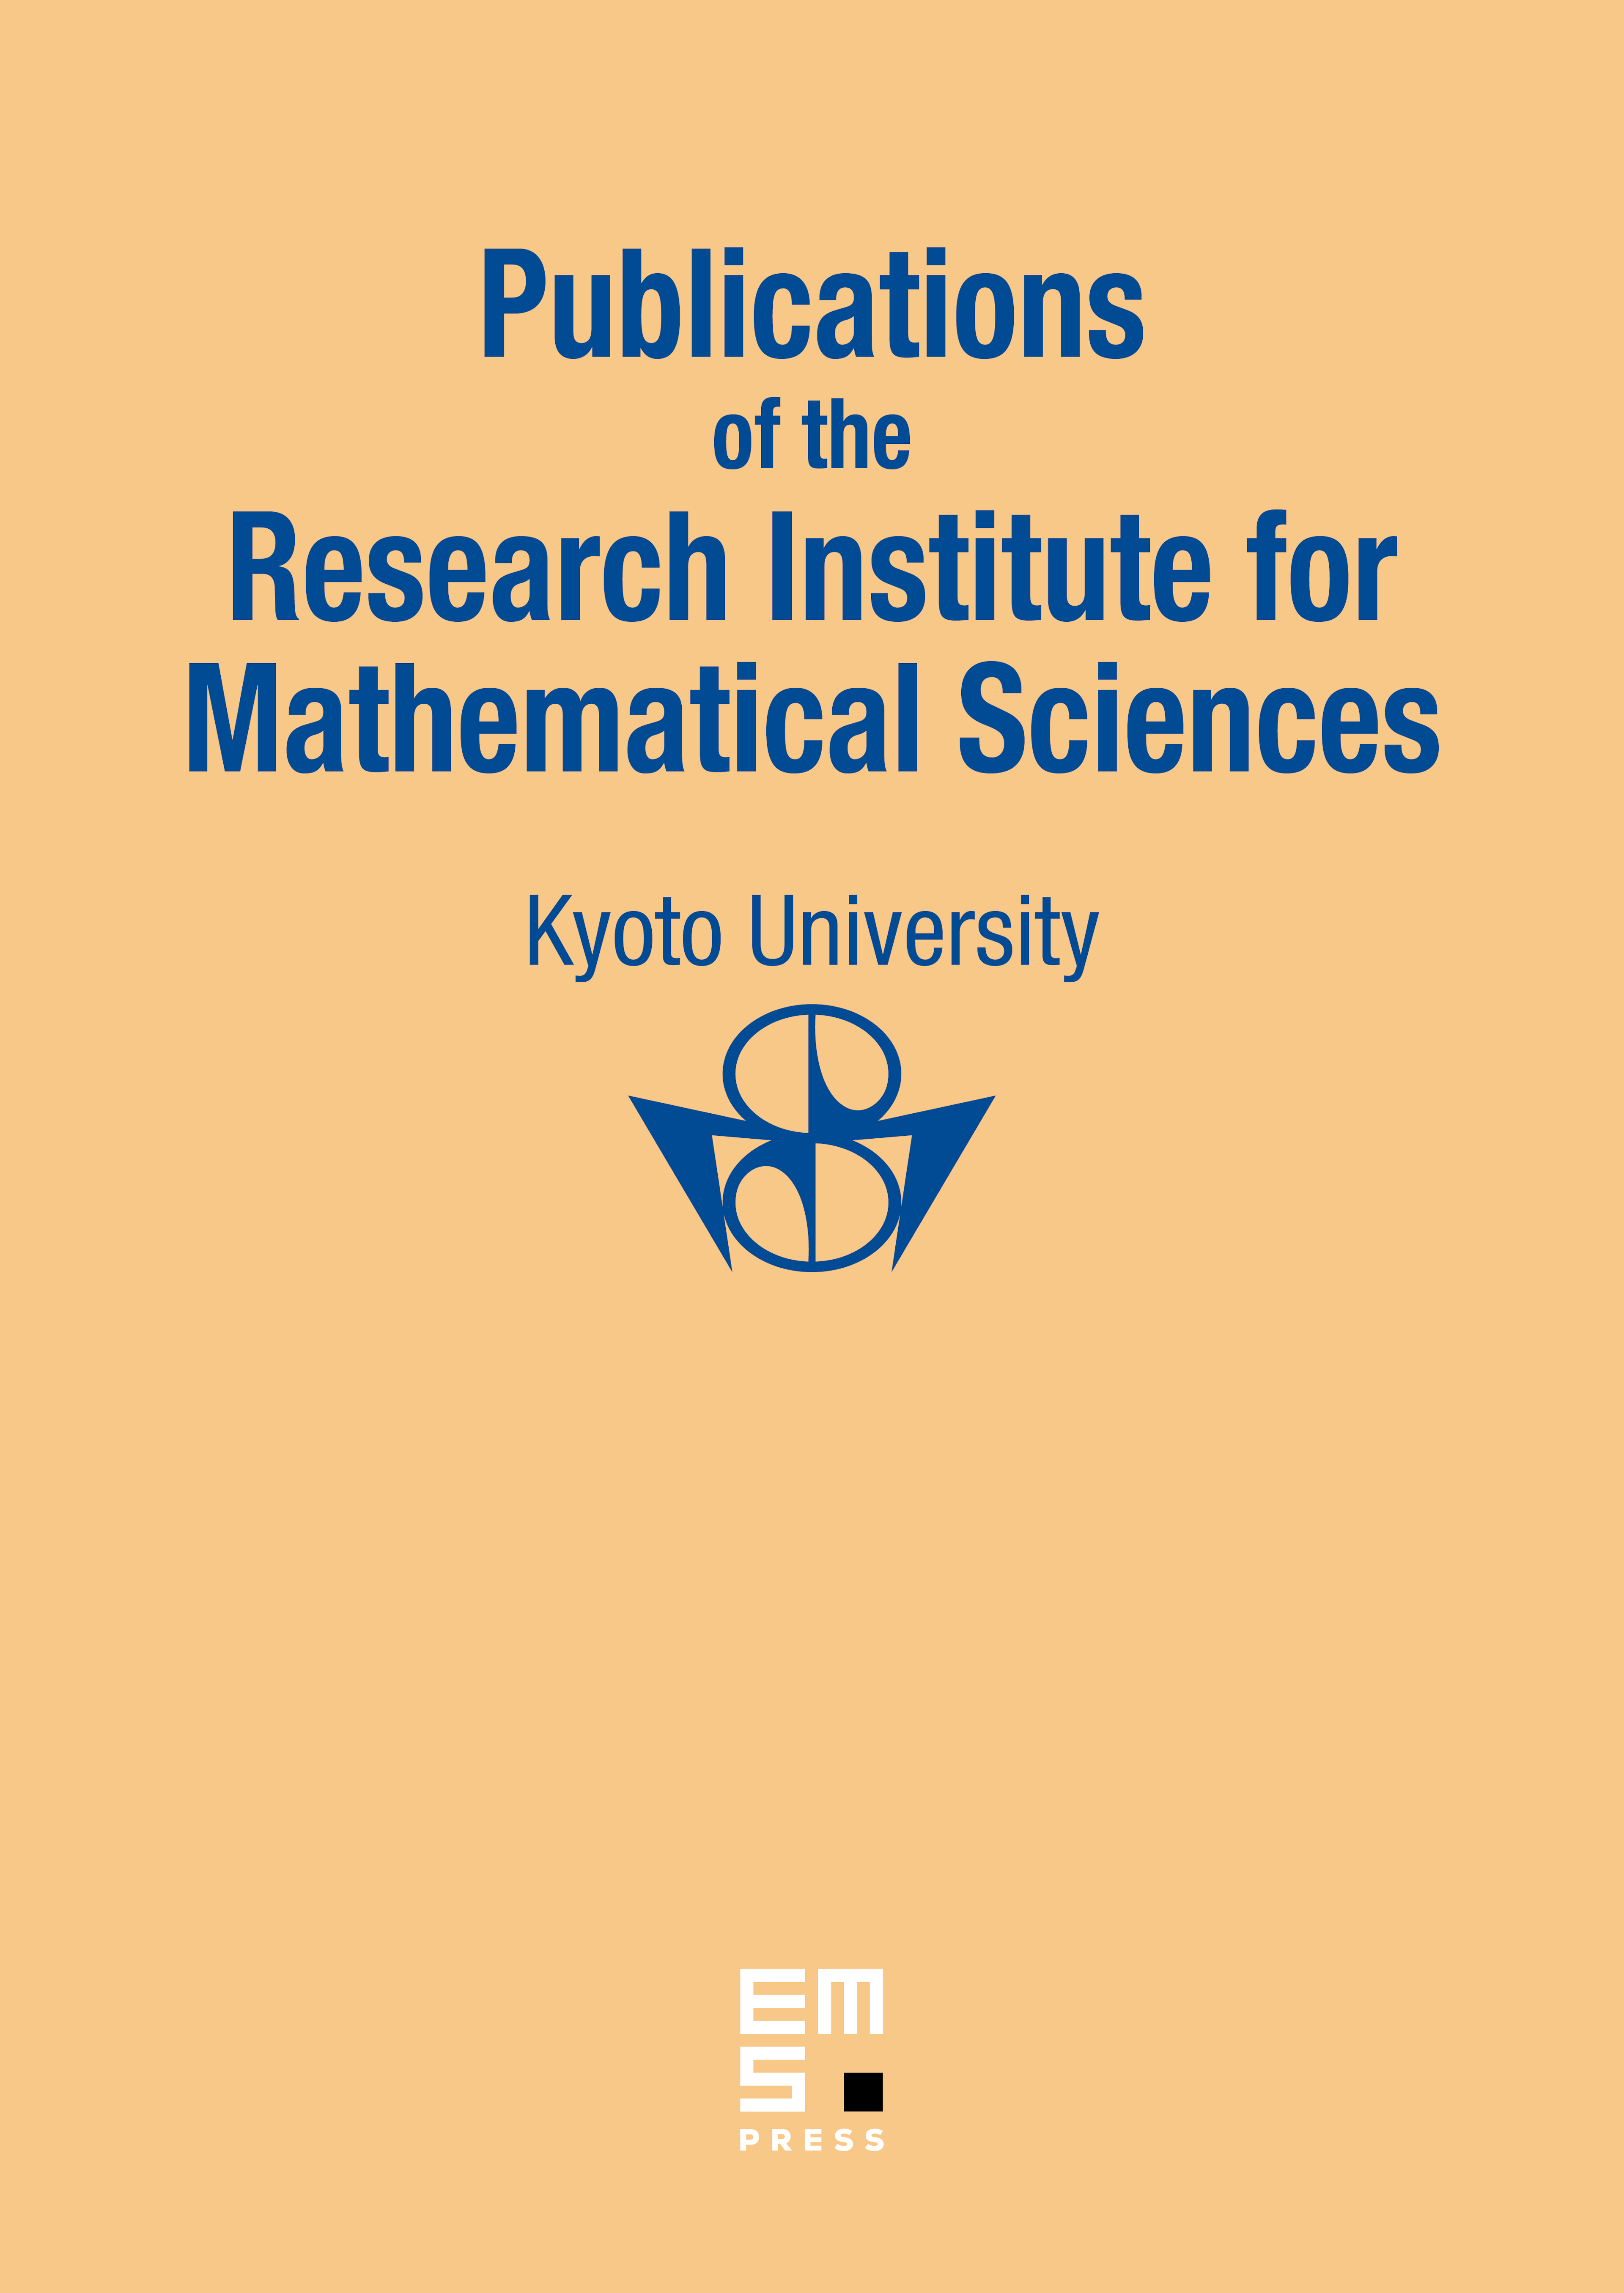 Spherical Functions of the Principal Series Representations of $Sp(2, \mathbf R)$ as Hypergeometric Functions of $\mathrm C_2$-Type cover